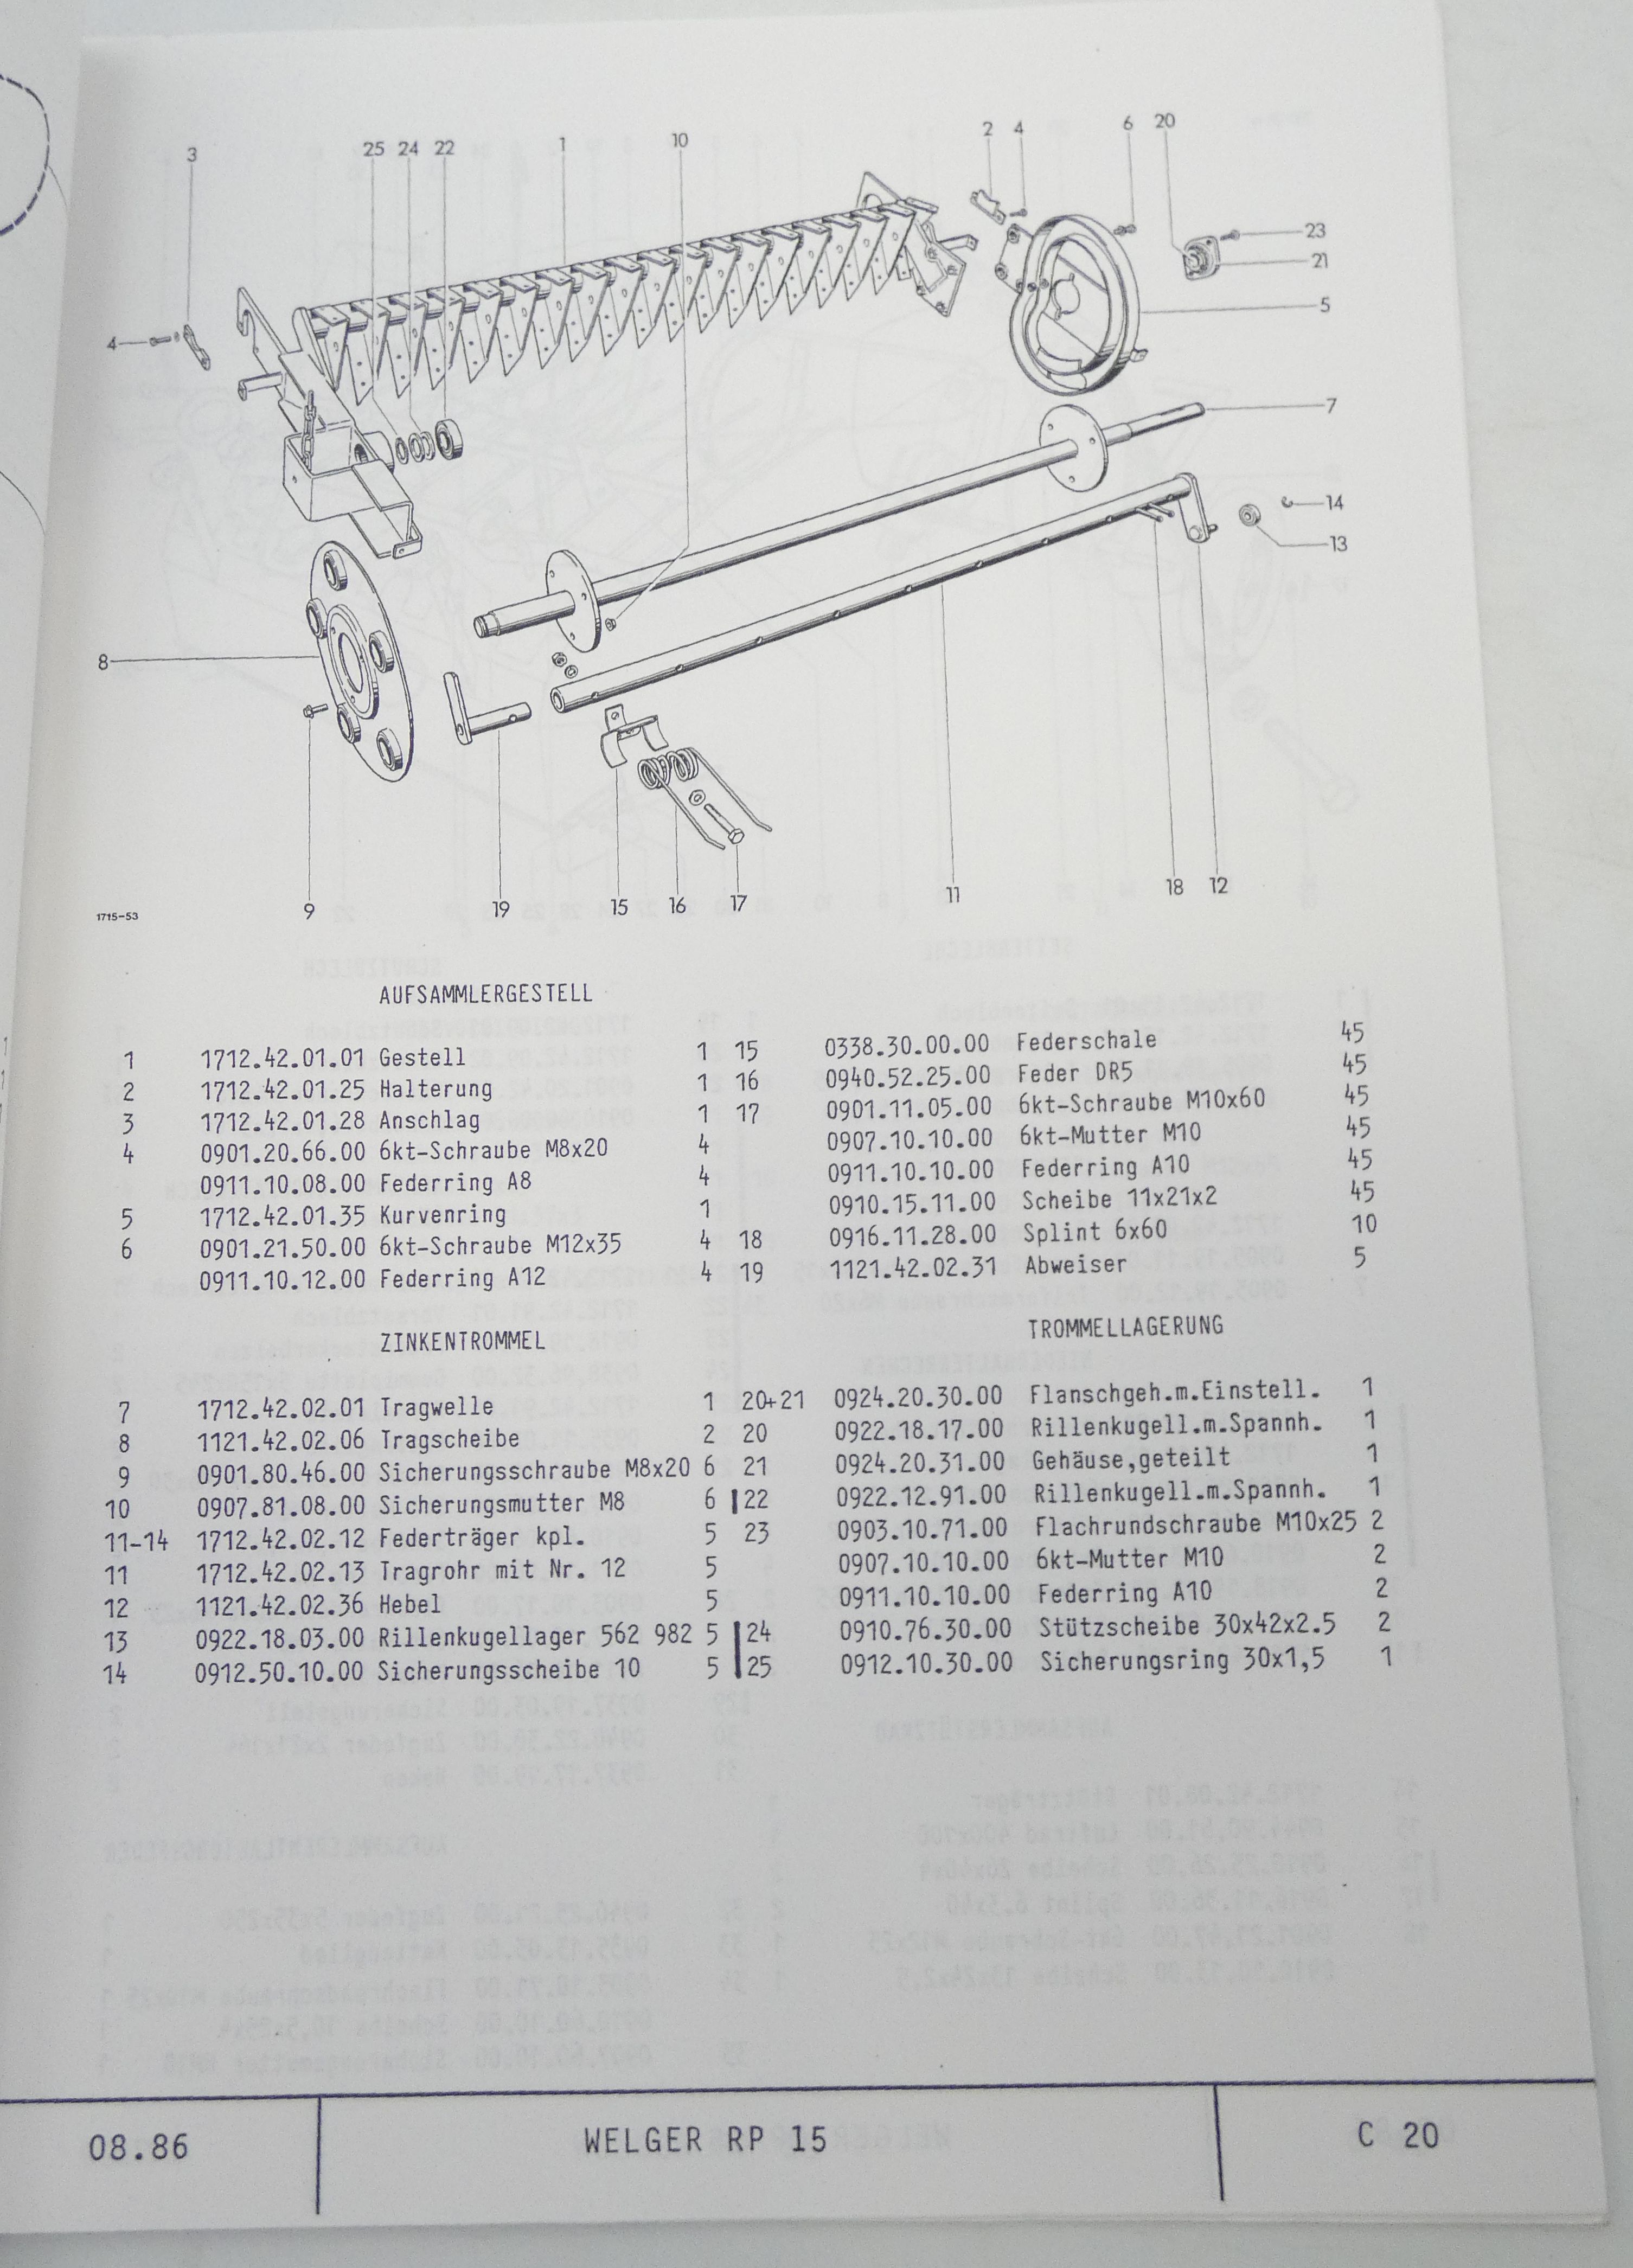 Welger RP 15 spare parts list